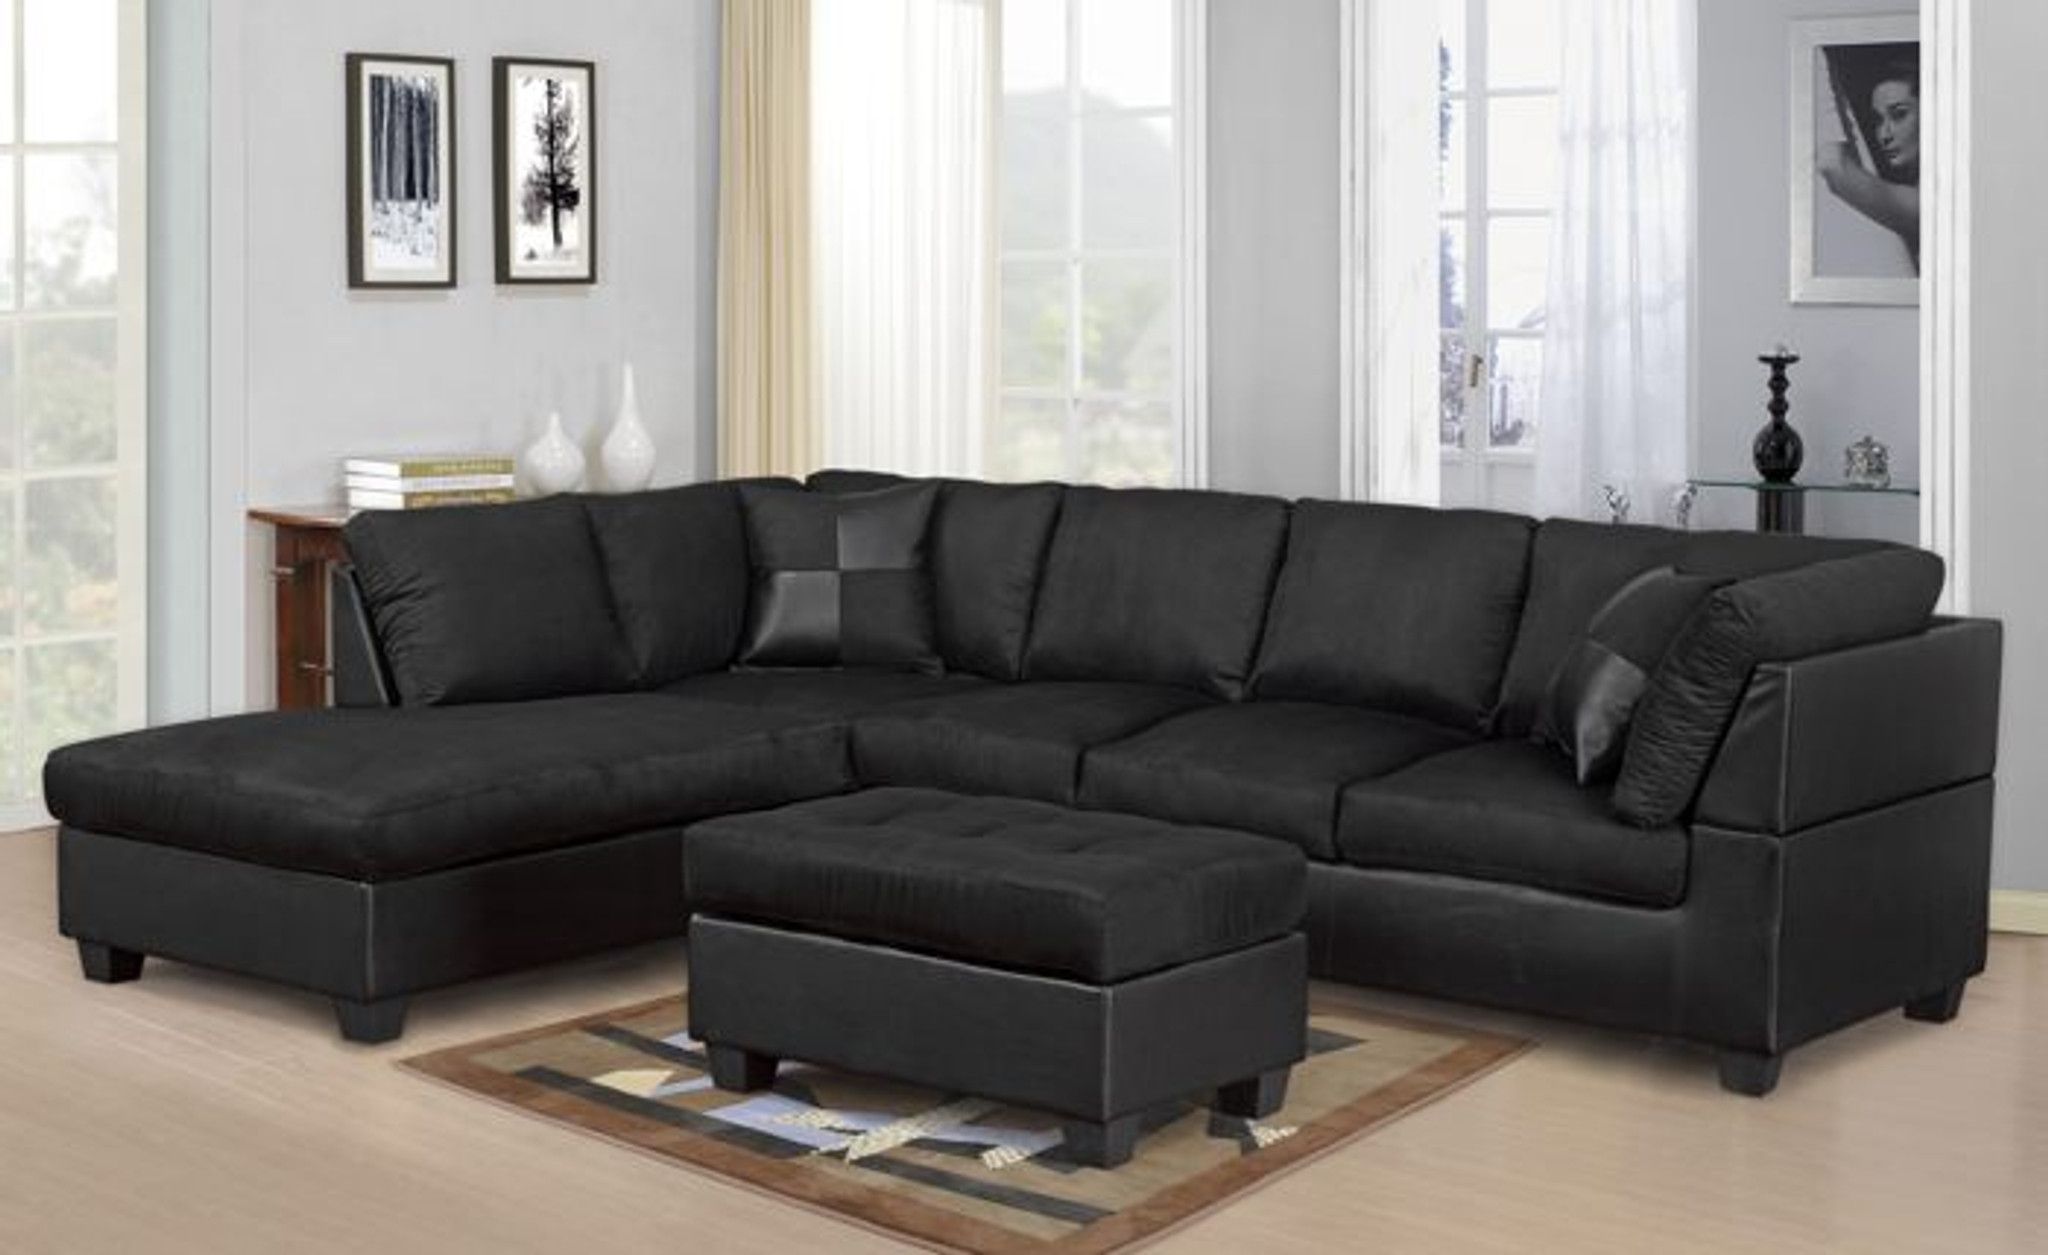 Modern 2pc Black Sectional Sofa And Chaise – Kassa Mall Home Furniture With Right Facing Black Sofas (View 20 of 20)